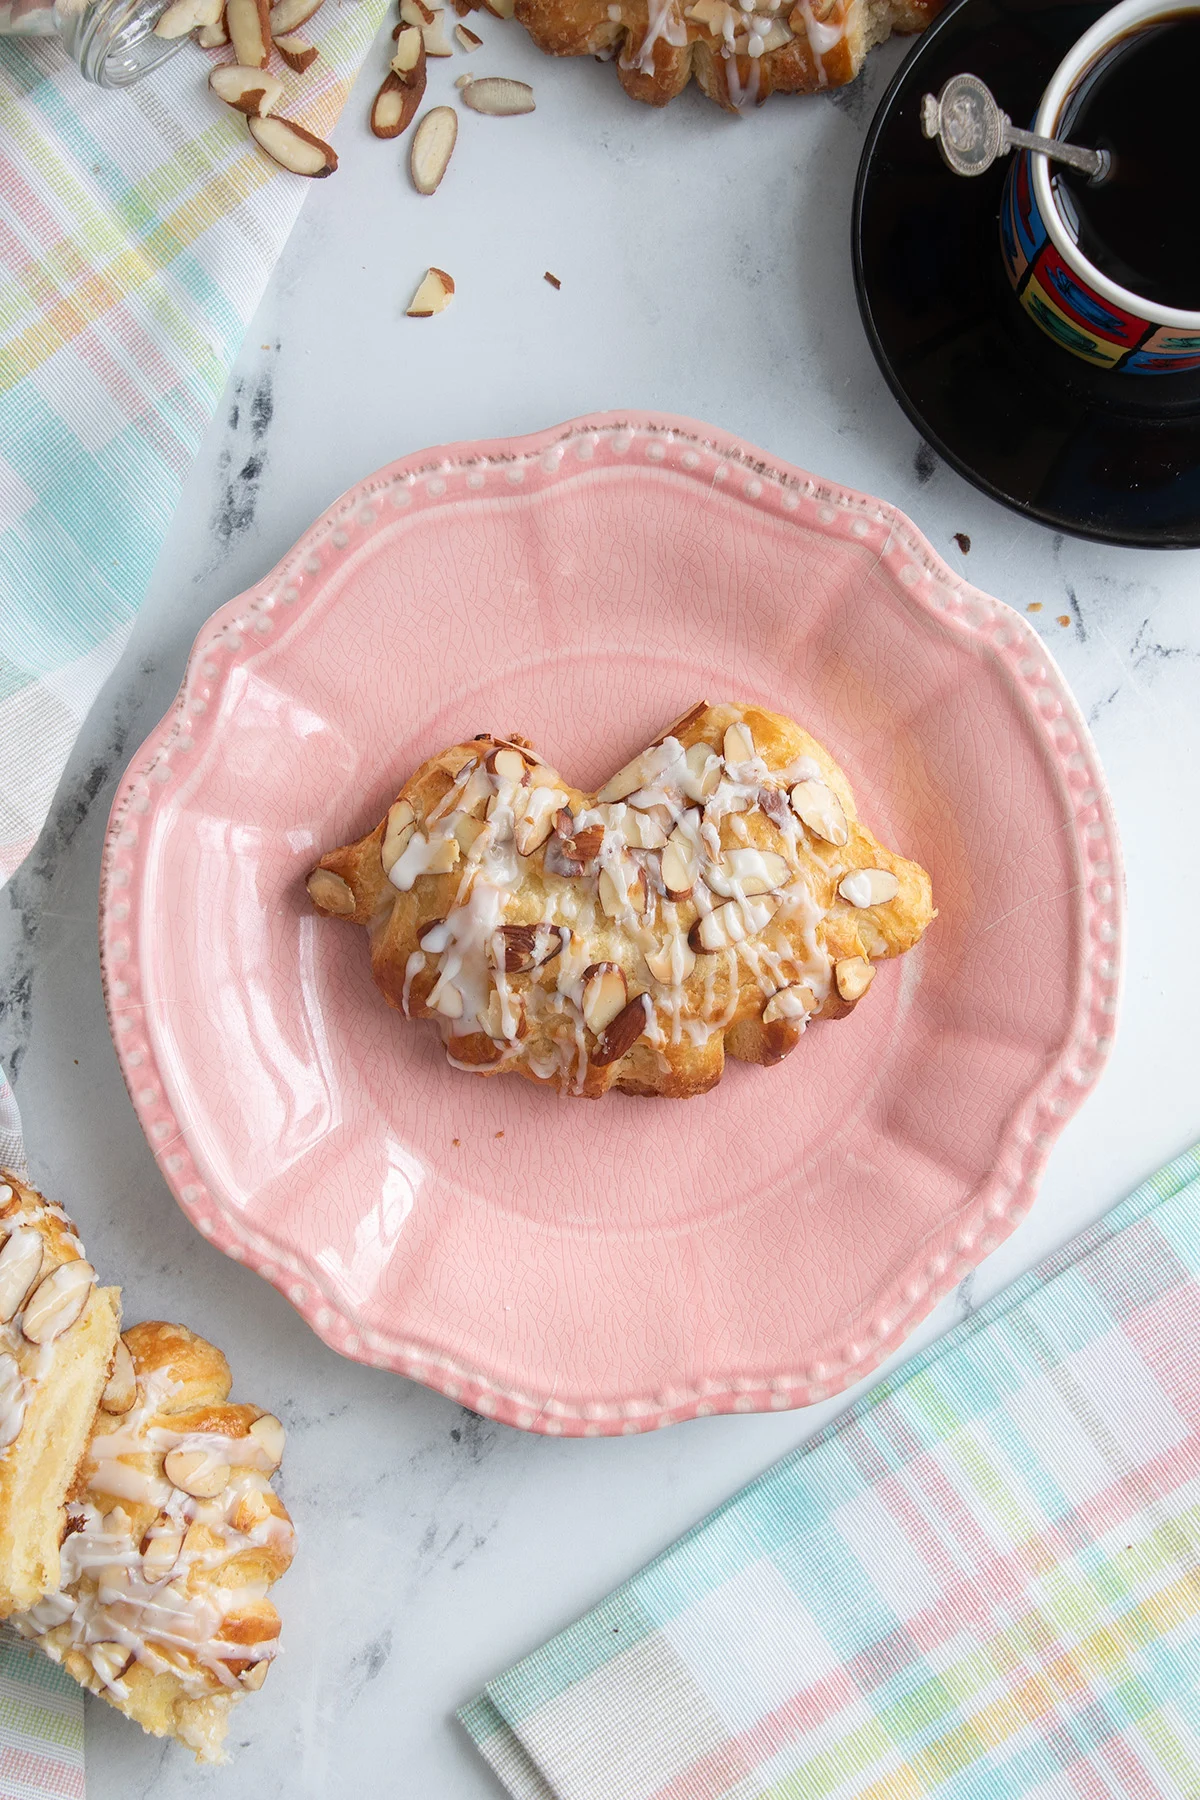 These scrumptious Bear Claw Pastries are made with real Danish pastry dough and a luscious almond filling. You can let the pastries rise in the refrigerator overnight and bake first thing in the morning.